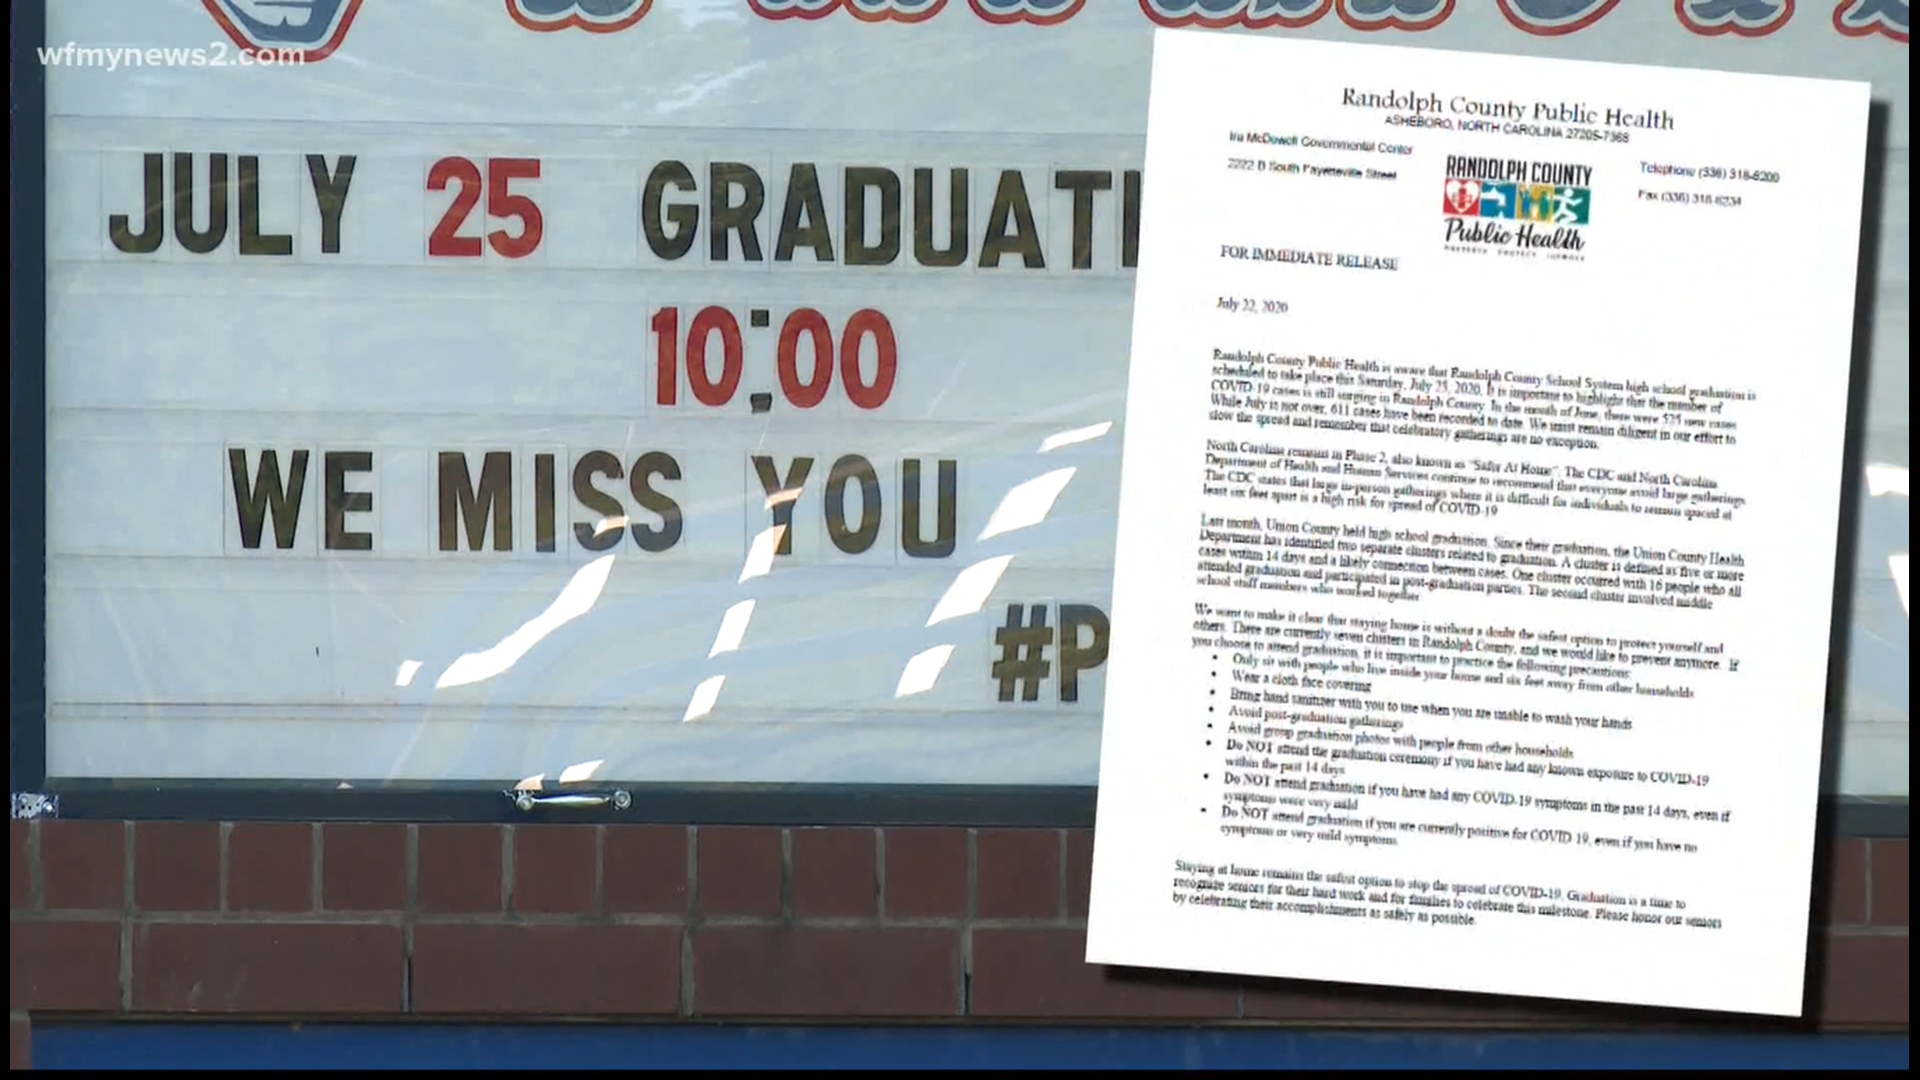 Allison Lucas of Randleman said walking across the stage is something she doesn't want to miss, but the Randolph County Health Director shared concerns.